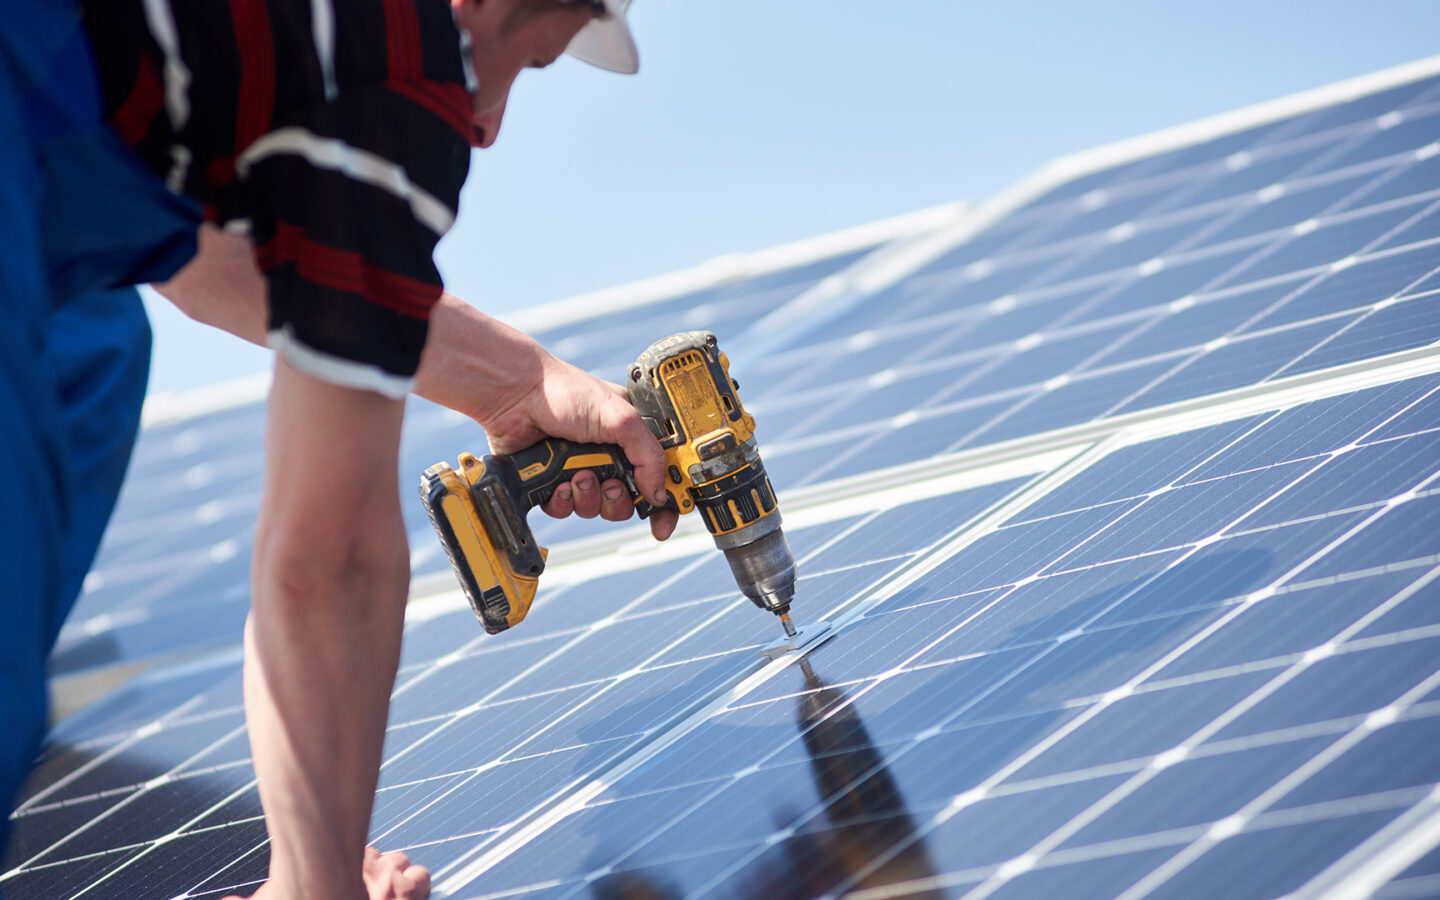 A white man in a striped shirt and blue pants uses a drill to install solar panels.